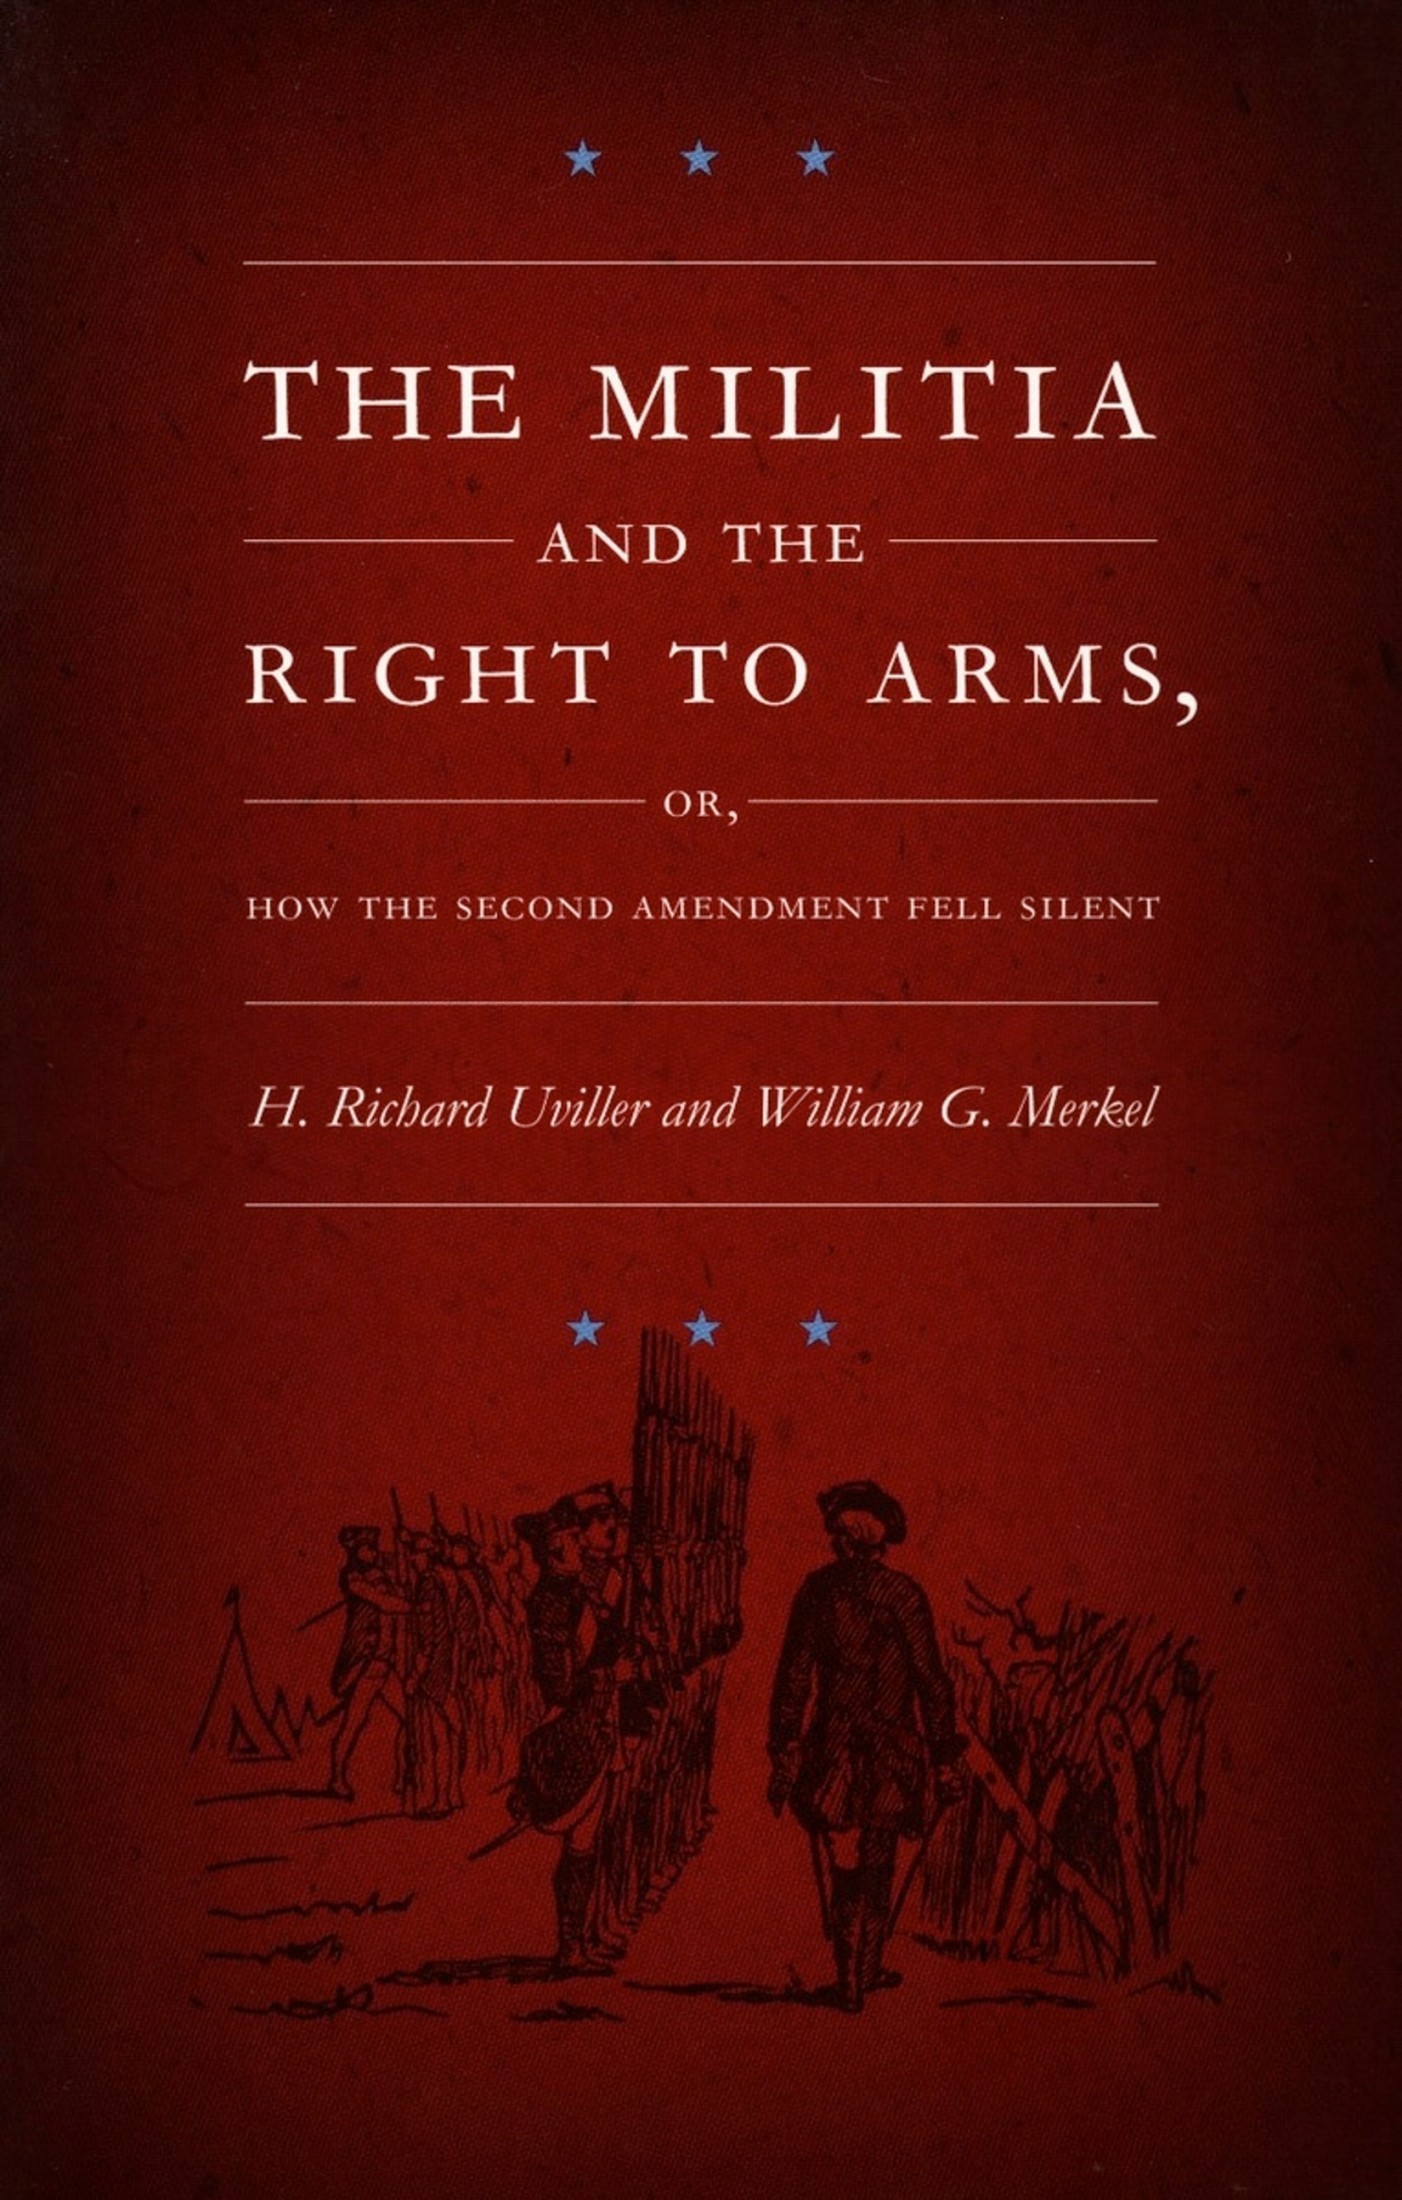 The Militia and the Right to Arms, Or, How the Second Amendment Fell Silent